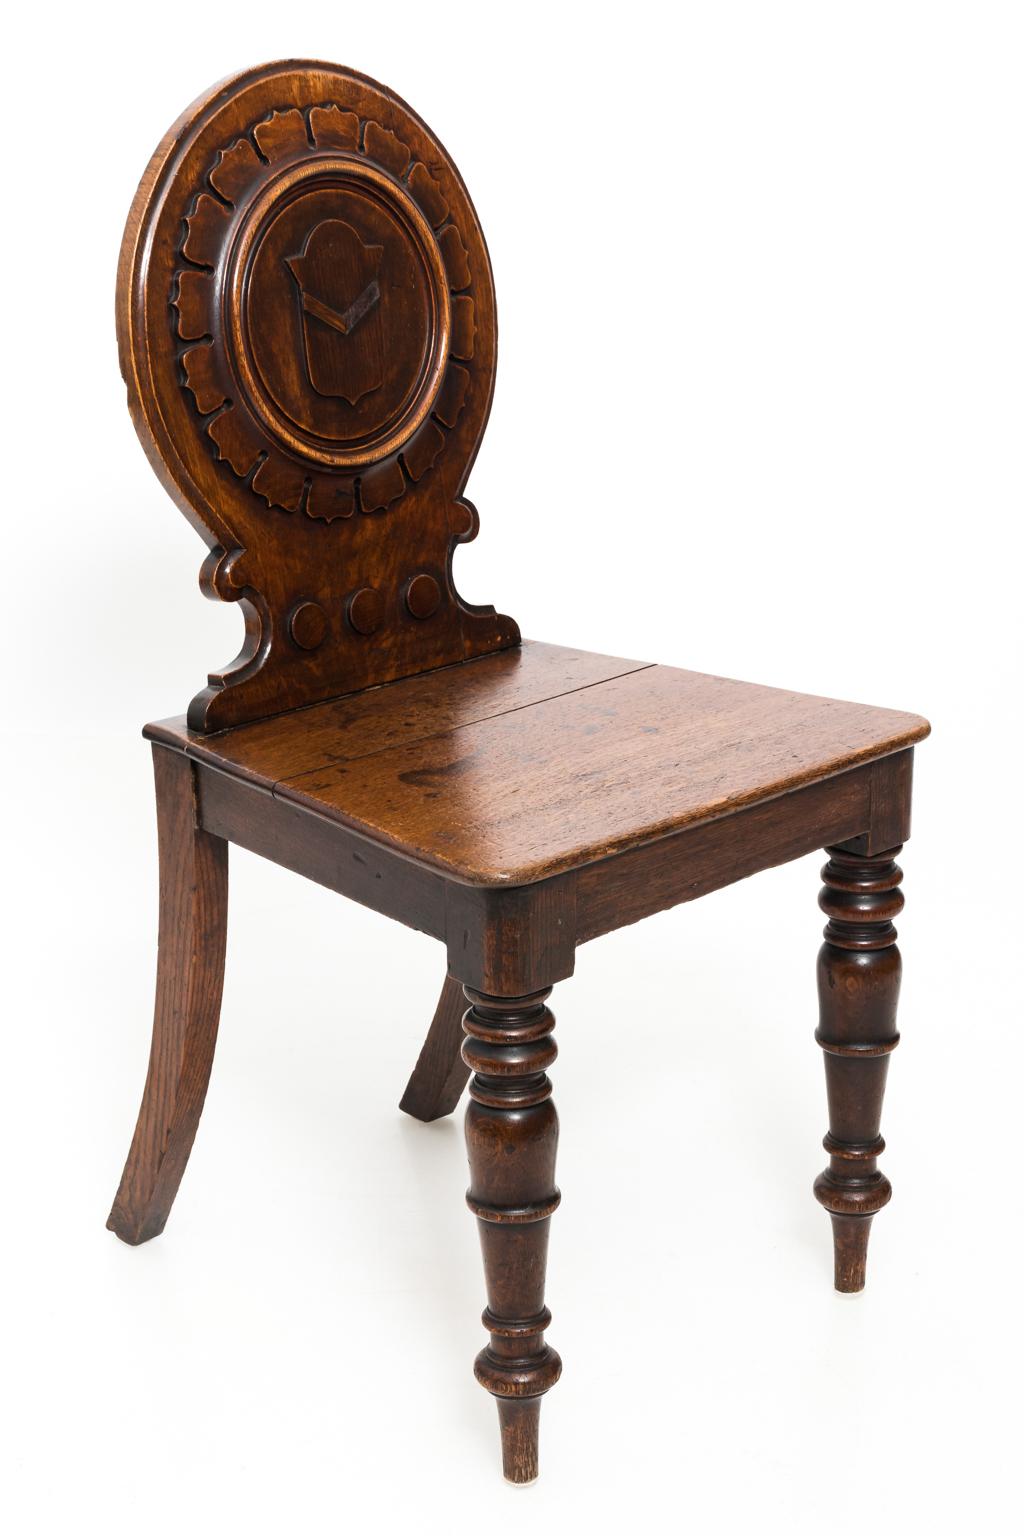 Pair of English oak hall side chairs with center shield crest, circa 1880-1890. The chairs also feature ring turned legs. Please note of wear consistent with age on the seat including worn edges and gapping in the wood.
 